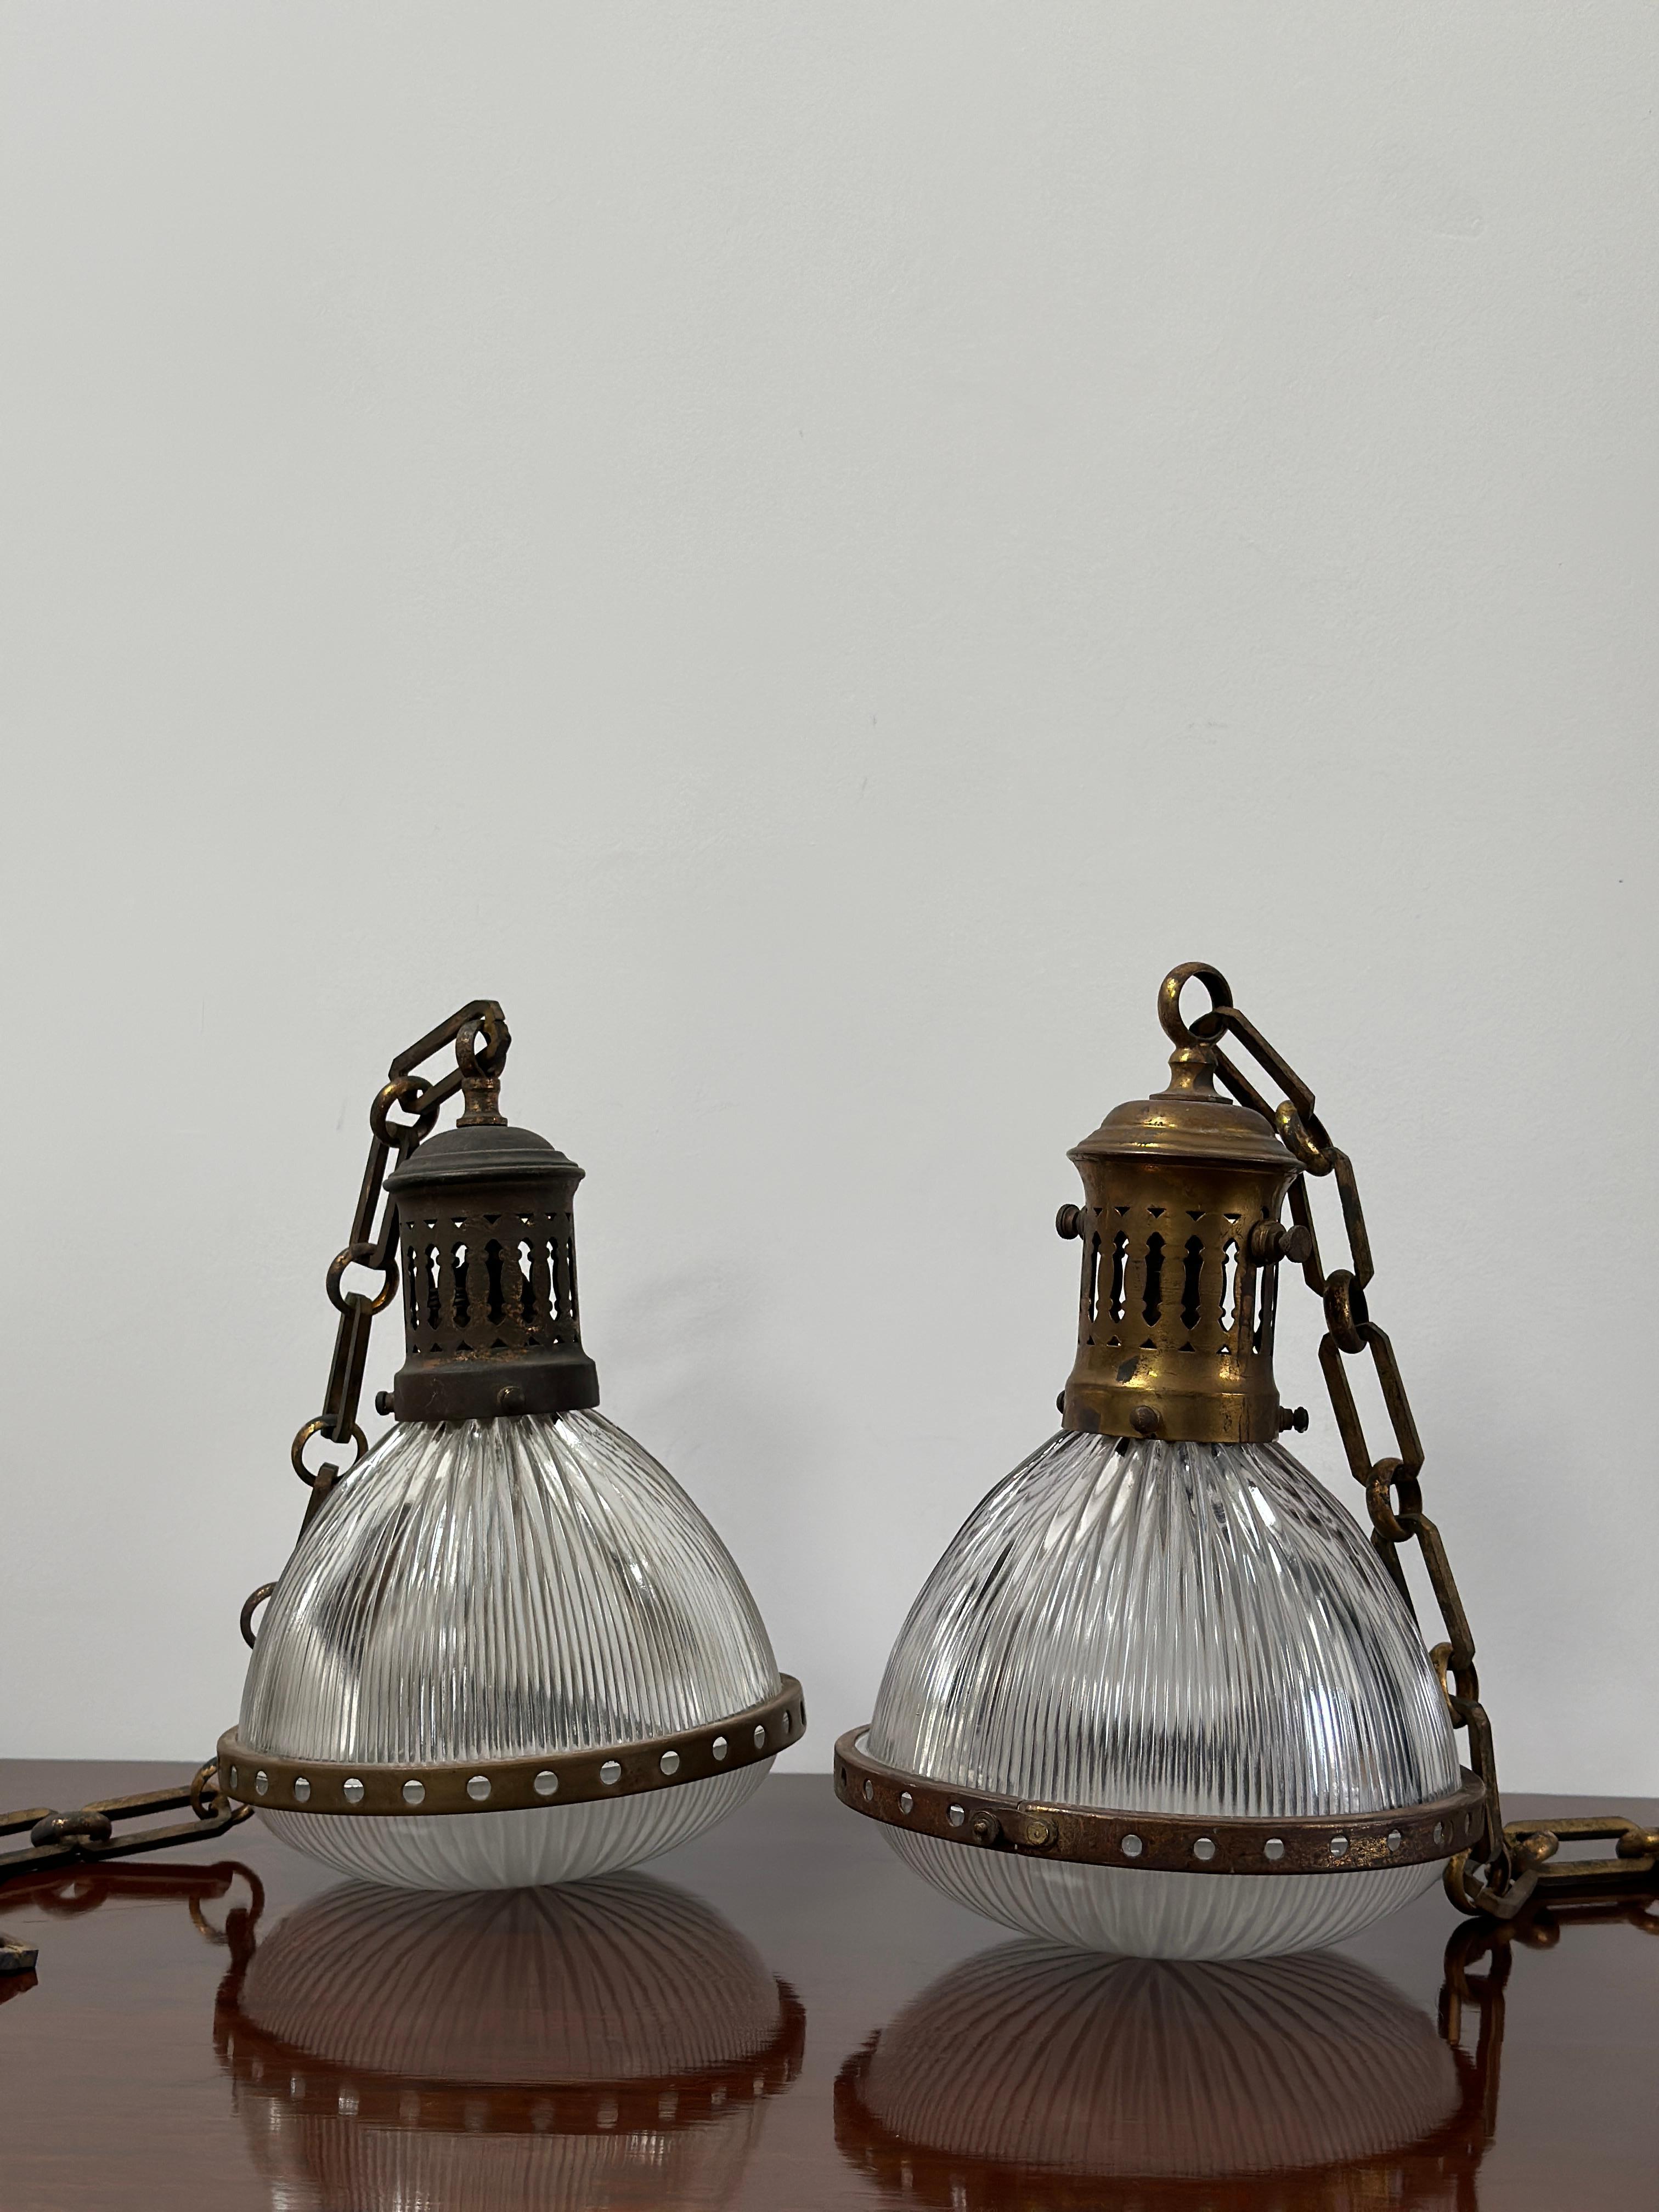 - A wonderful pair of rare caged brass Holophane pendants, France circa 1920.
- The pendants consist of a Holophane stamped glass shade and separate dish held together by a circular patinated brass ring.  
- A decorative gallery with adjustable bulb